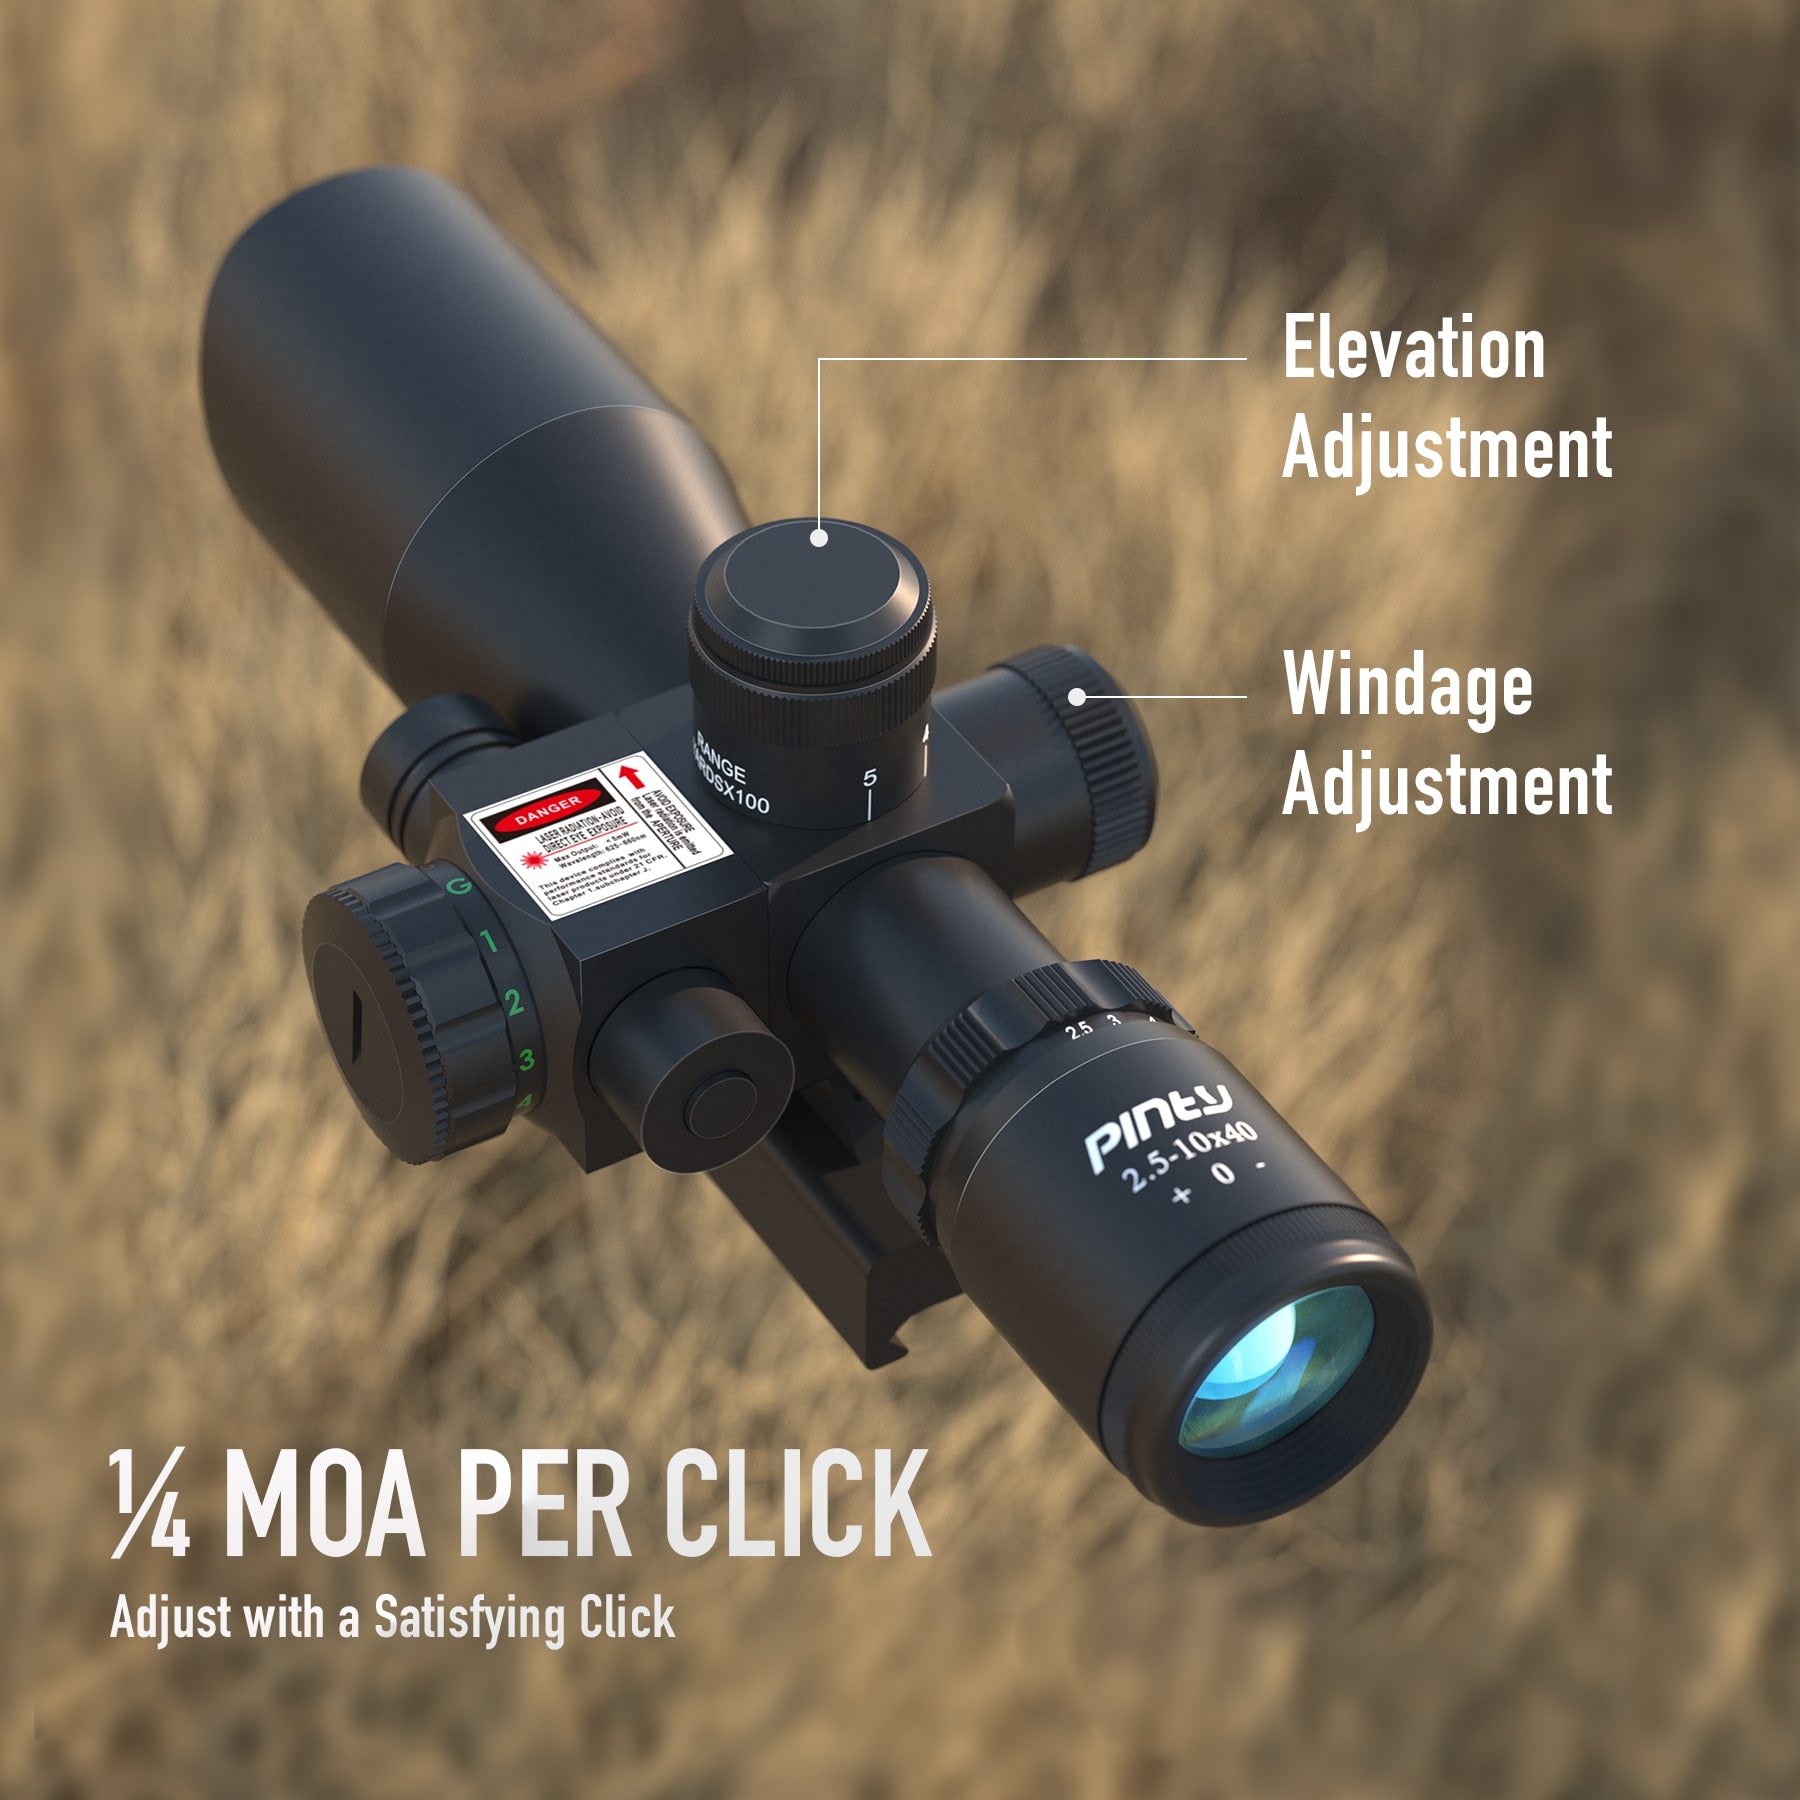         Tactical--Rifle-Scope-Laser-Holographic-Green-Red-Dot-Sight-Illuminated-Rectile